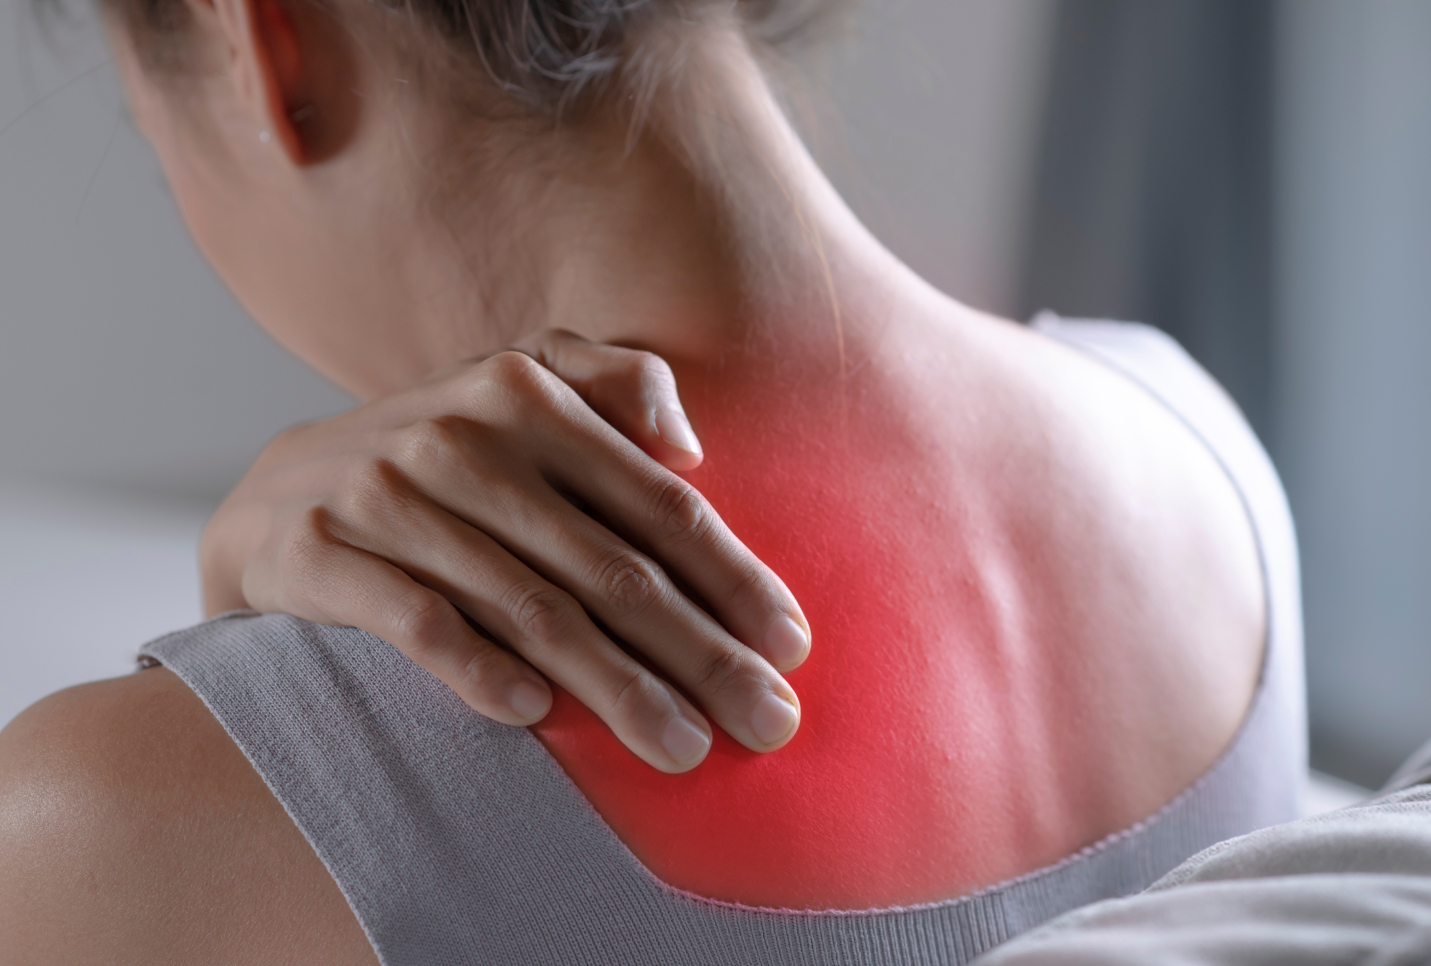 VA Disability Rating for Myofascial Pain Syndrome